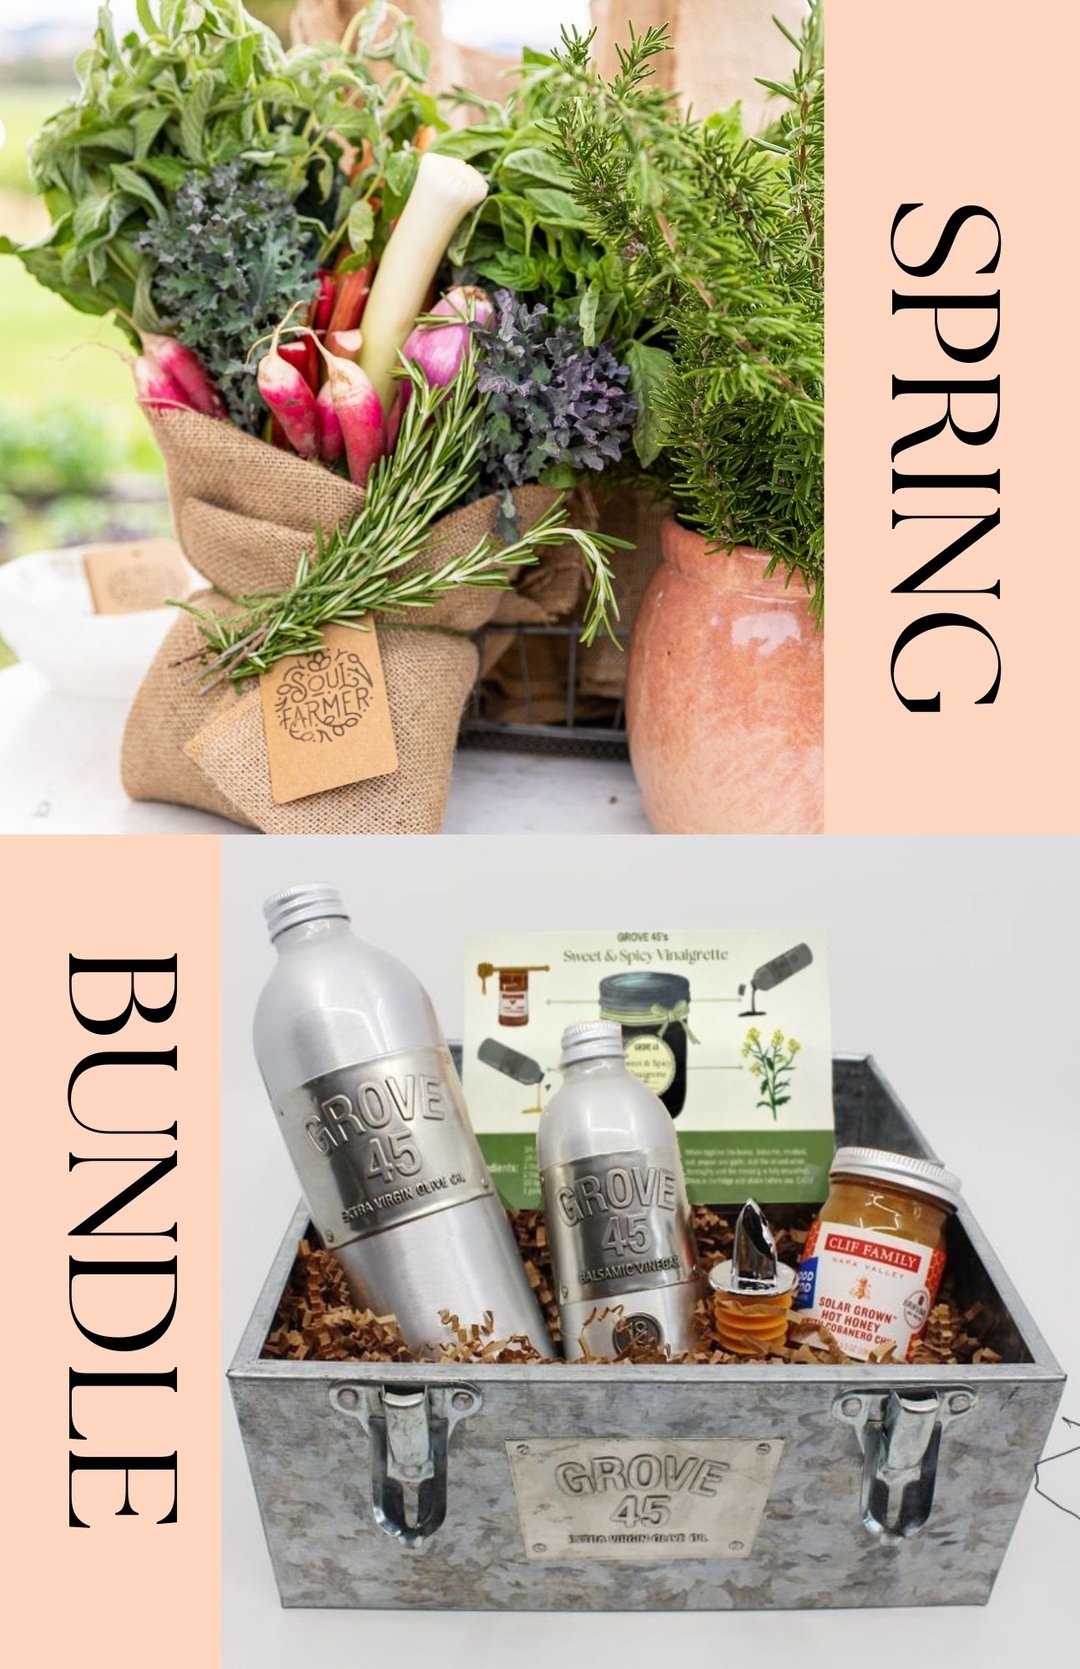 Exciting News!! We're teaming up with Grove 45 again to create a Spring Bundle full of goodness and can be pick up in Calistoga or Marin. 

The Spring Bundle includes: 
✓ 1 Soul Farmer Spring Bouquet
✓ Grove 45 signature EVOO, 18-year-aged balsamic v